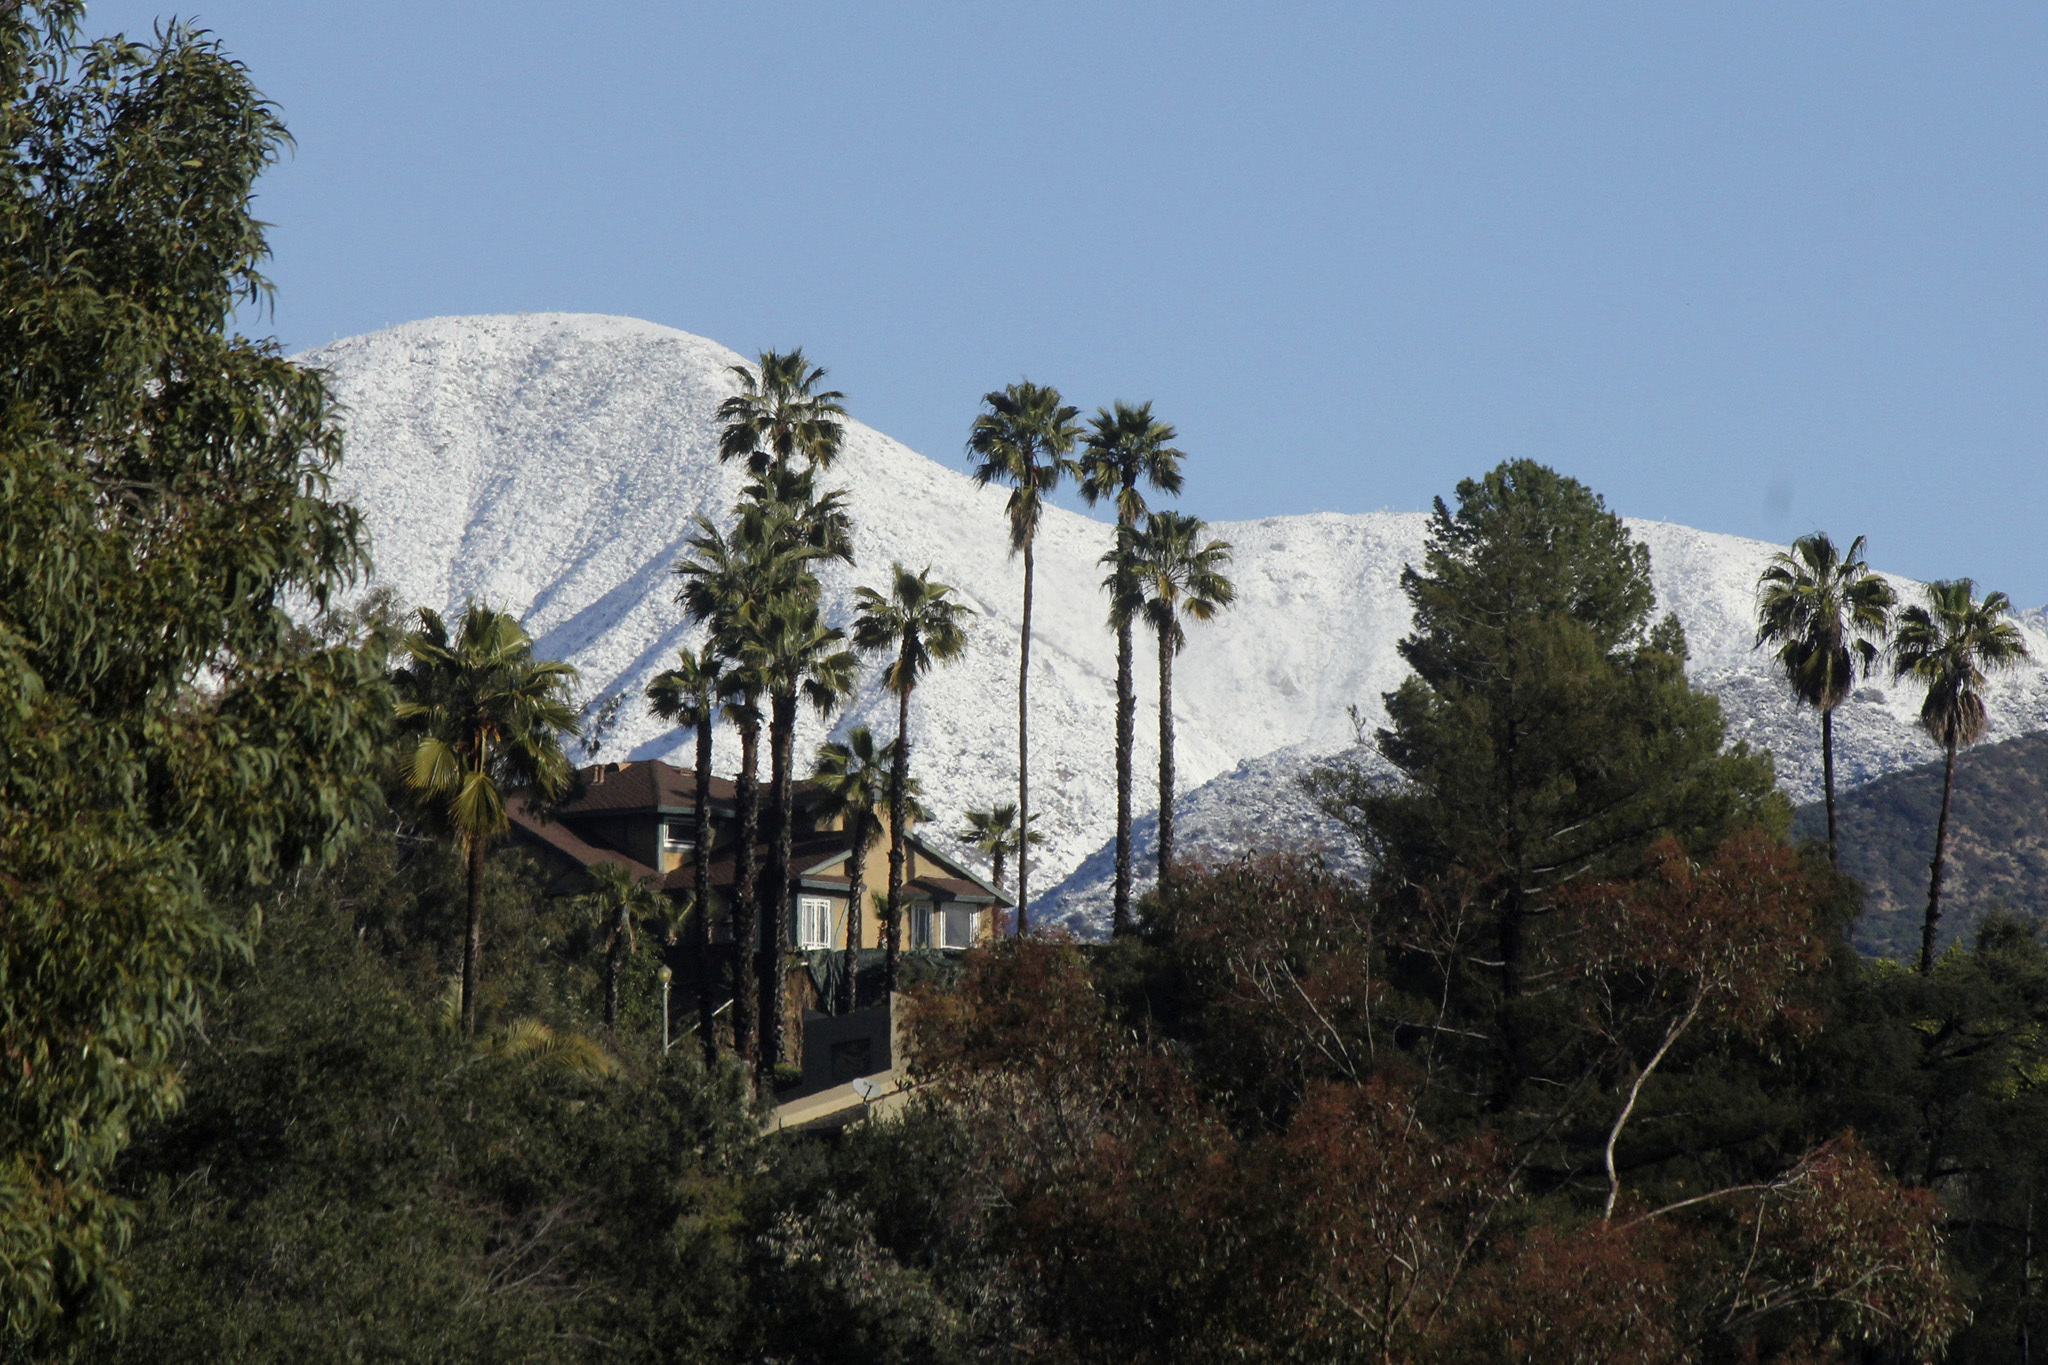 Snow, graupel fall on Los Angeles and Disneyland throughout California storm